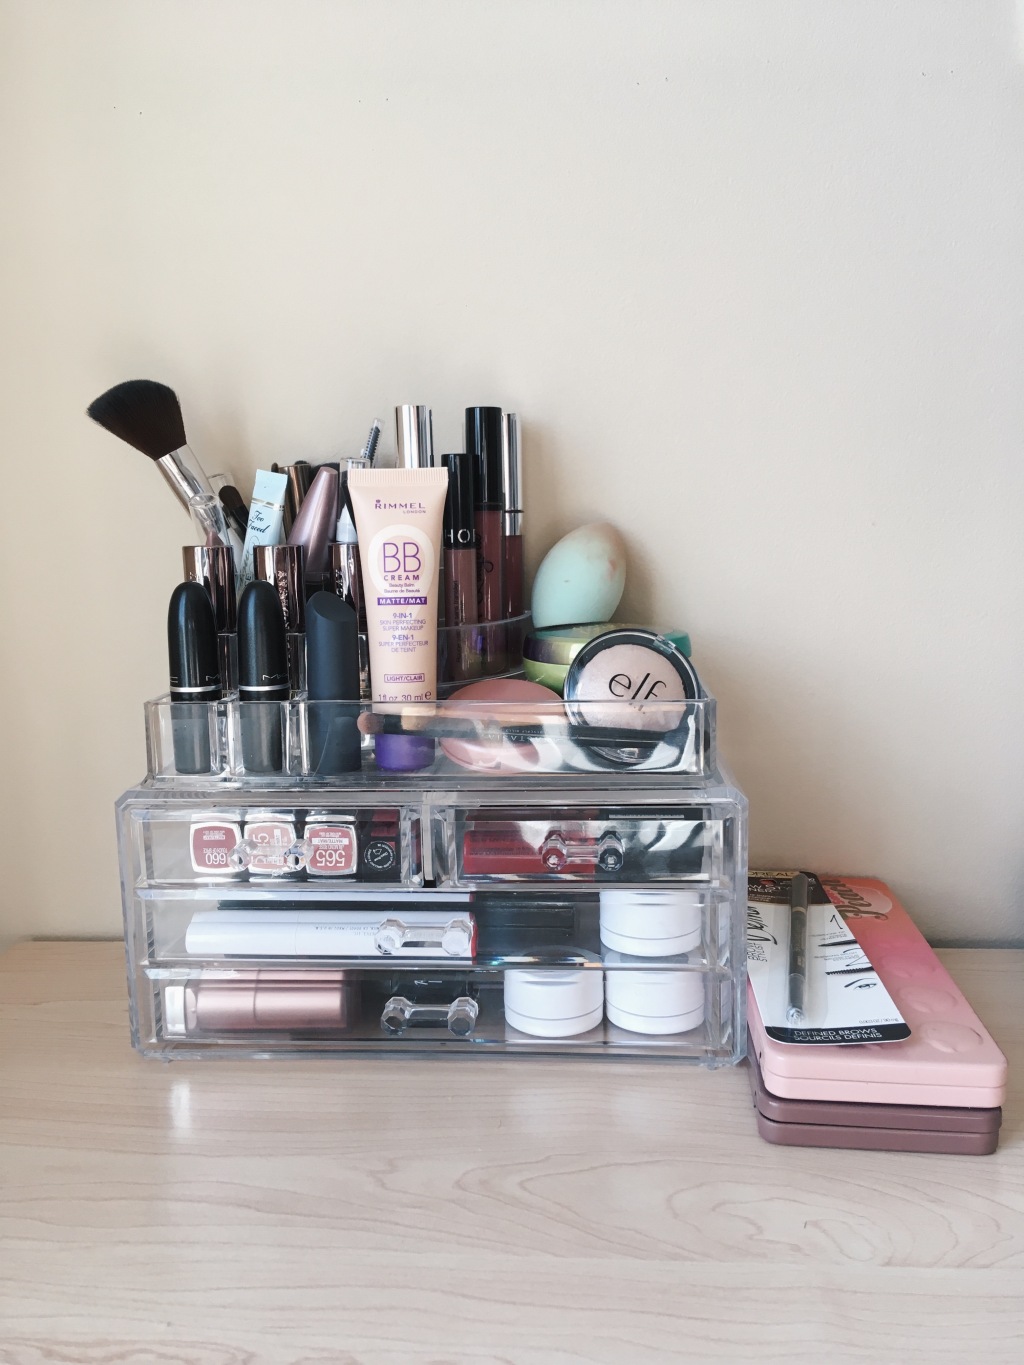 My Makeup Collection (2017)